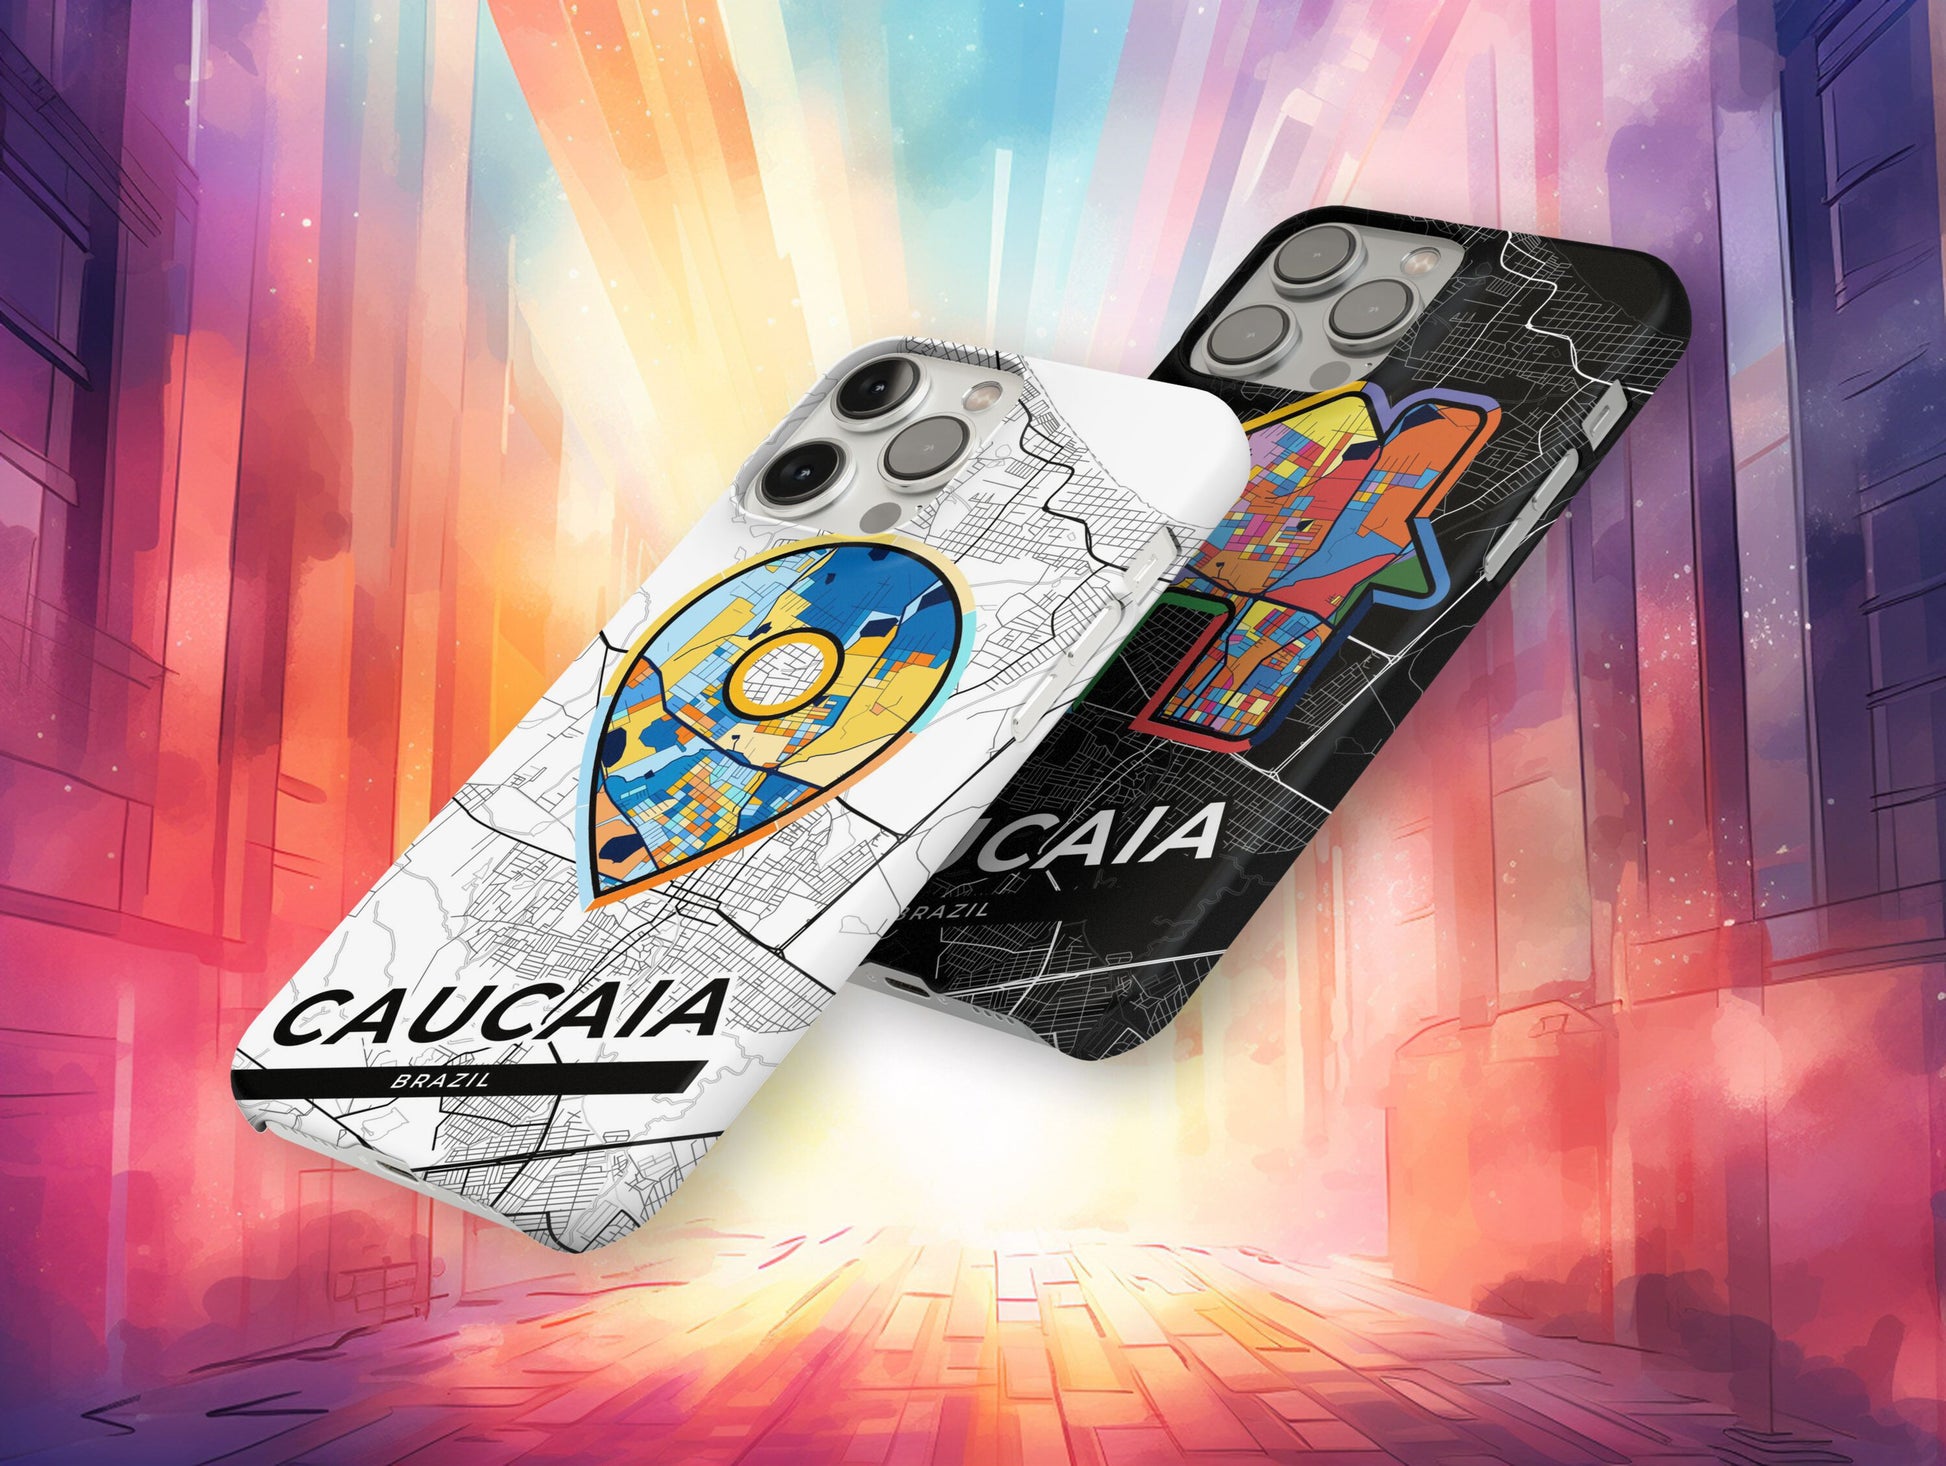 Caucaia Brazil slim phone case with colorful icon. Birthday, wedding or housewarming gift. Couple match cases.